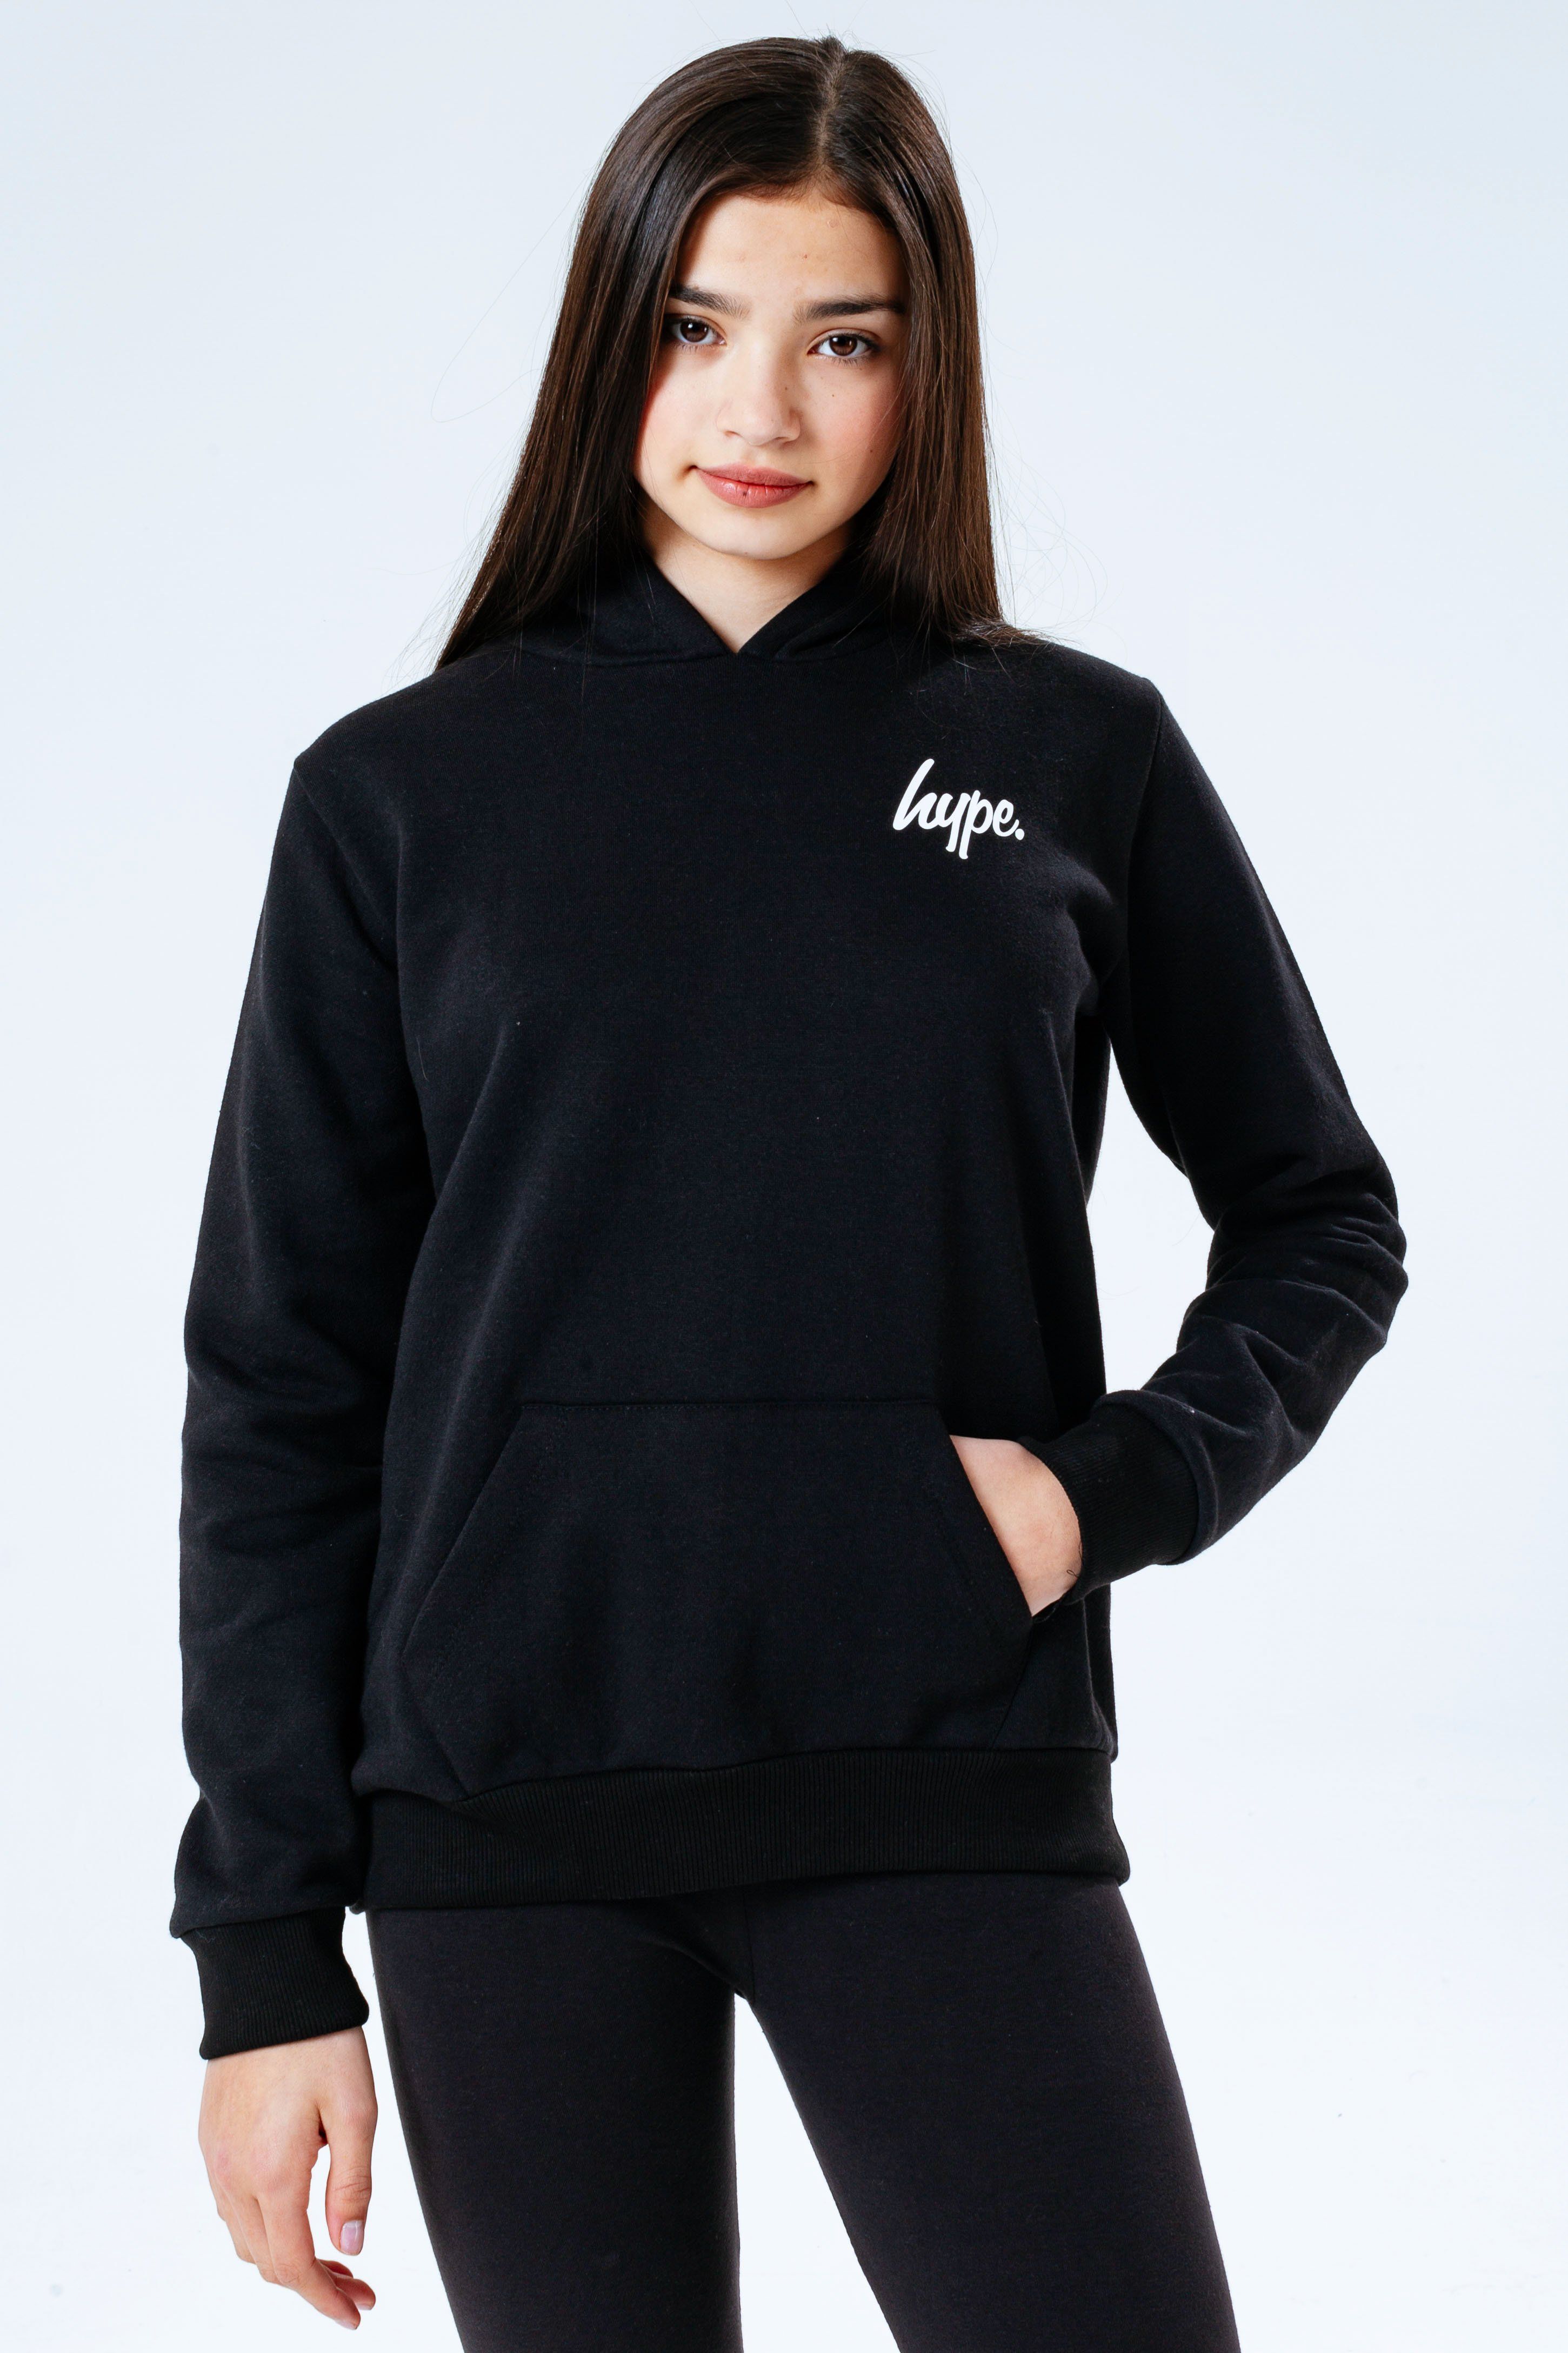 The Hype Black Kids Hoodie and Leggings Set is perfect for off-duty casual days. Designed in a classic black fabric base with the ultimate soft-touch sweat fabric for supreme comfort. The kids hoodie highlights a fixed hood, fitted hem and cuffs, finished with the iconic HYPE. script logo across the front in a contrasting white. The leggings boast an elasticated waistband and fitted cuffs with the HYPE. script logo. Wear stand alone or as a set with a pair of box fresh kicks to complete the look. Machine wash at 30 degrees.